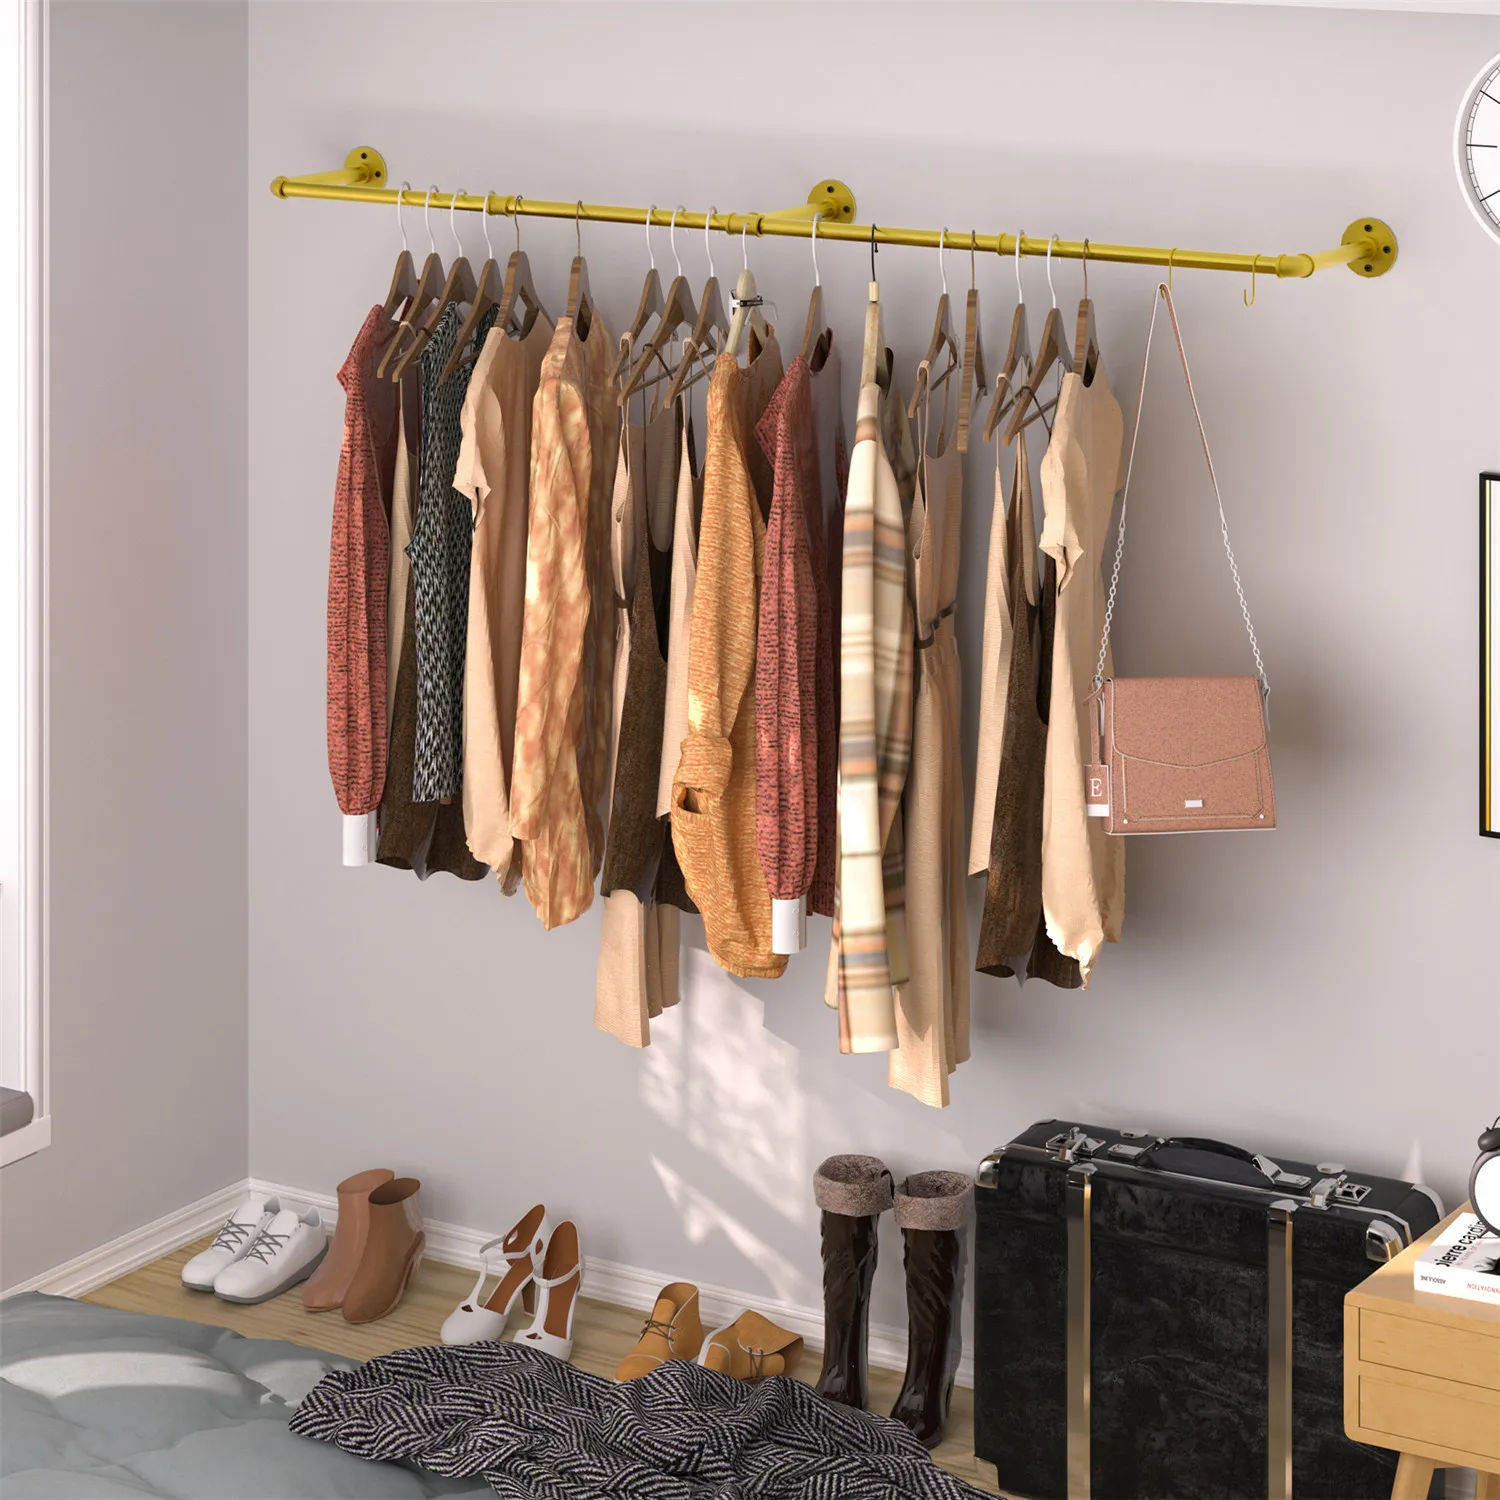 Industrial Pipe Clothes Hanging Rack: Wall Mounted Iron Clothing Storage Hanger Rod - Heavy Duty Multi-Purpose Metal Garment